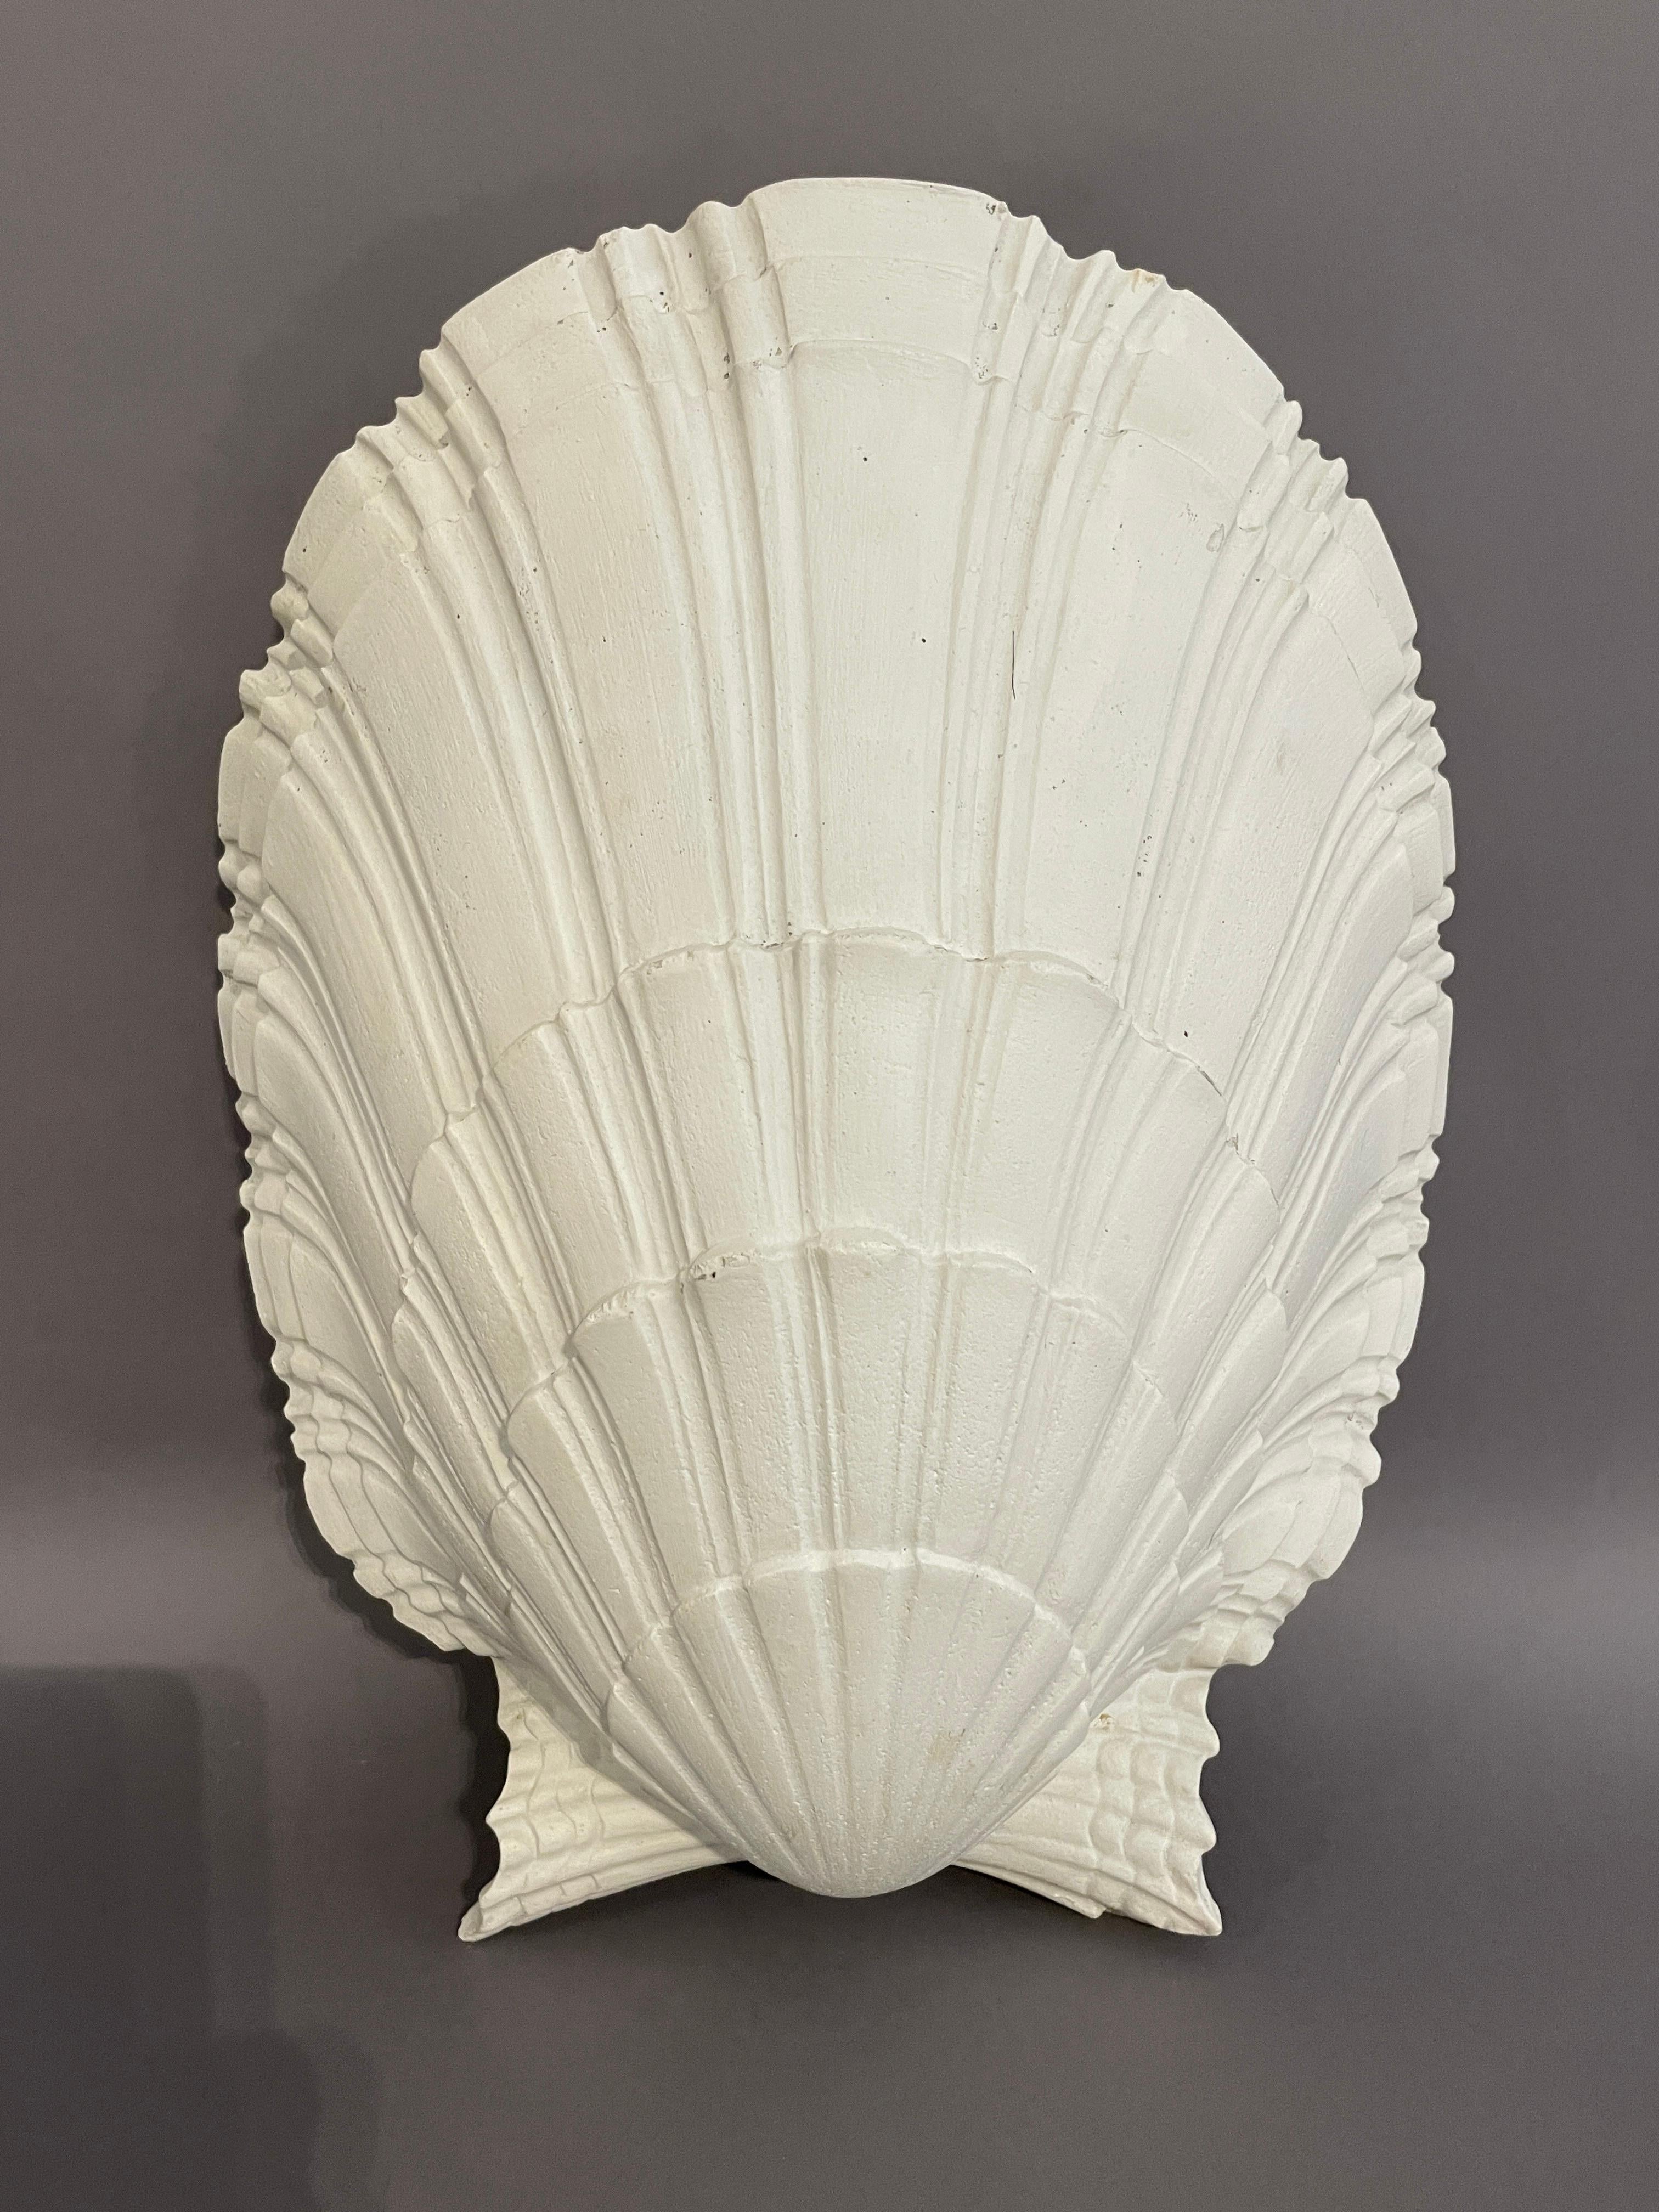 Single rare Serge Roche shell or conch in white plaster.
Excellent definition 